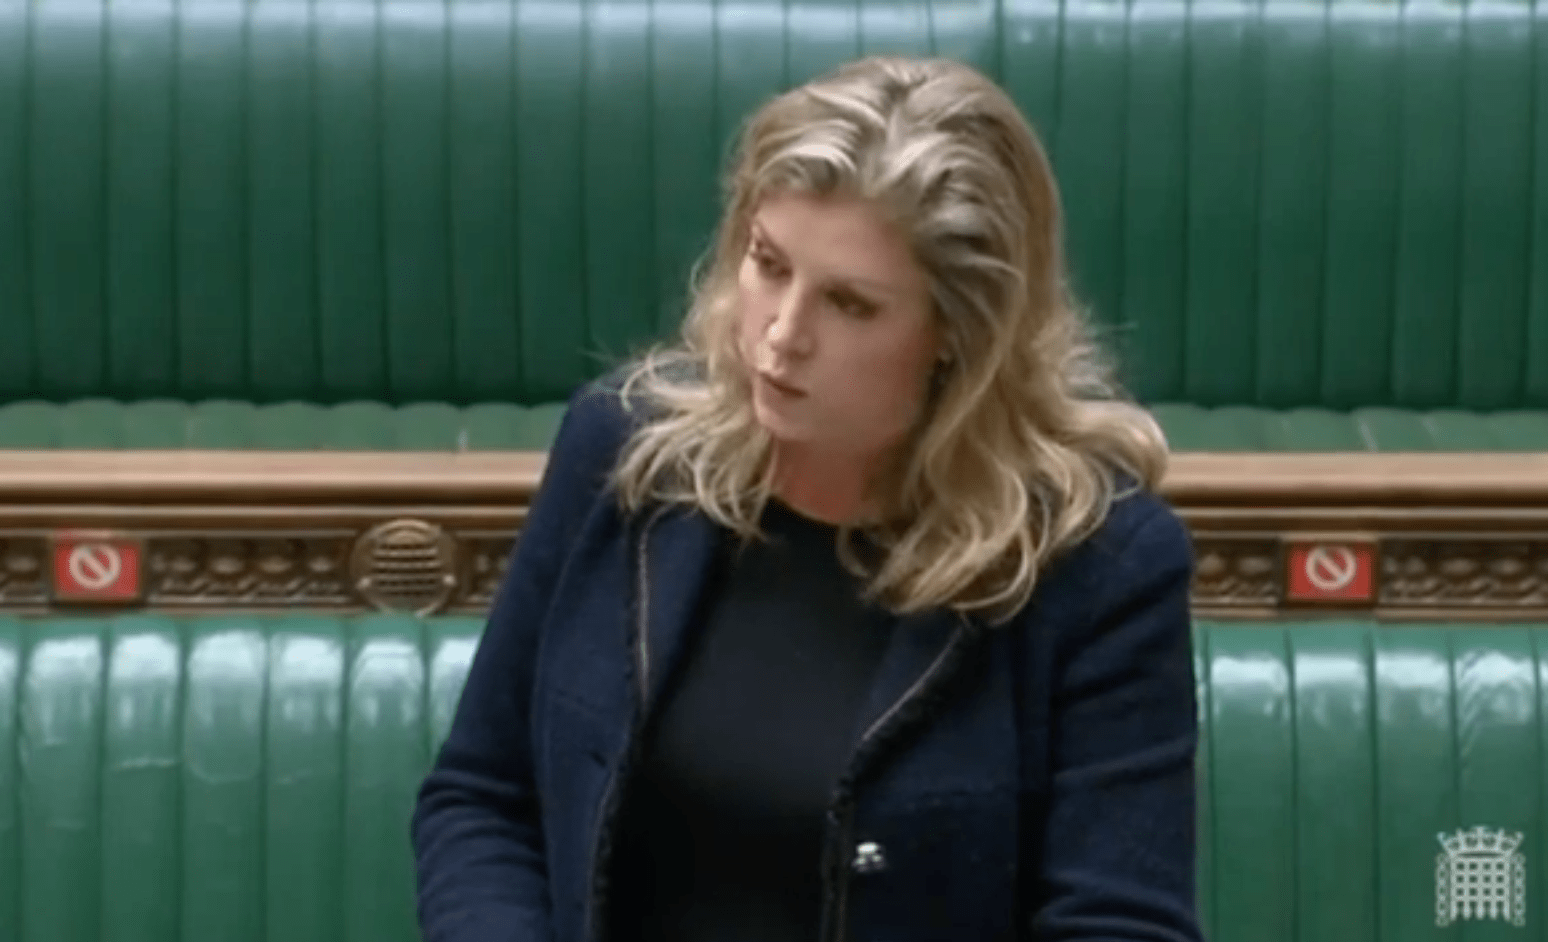 Penny Mordaunt attacks SNP's record in Scotland to tune of 'The 12